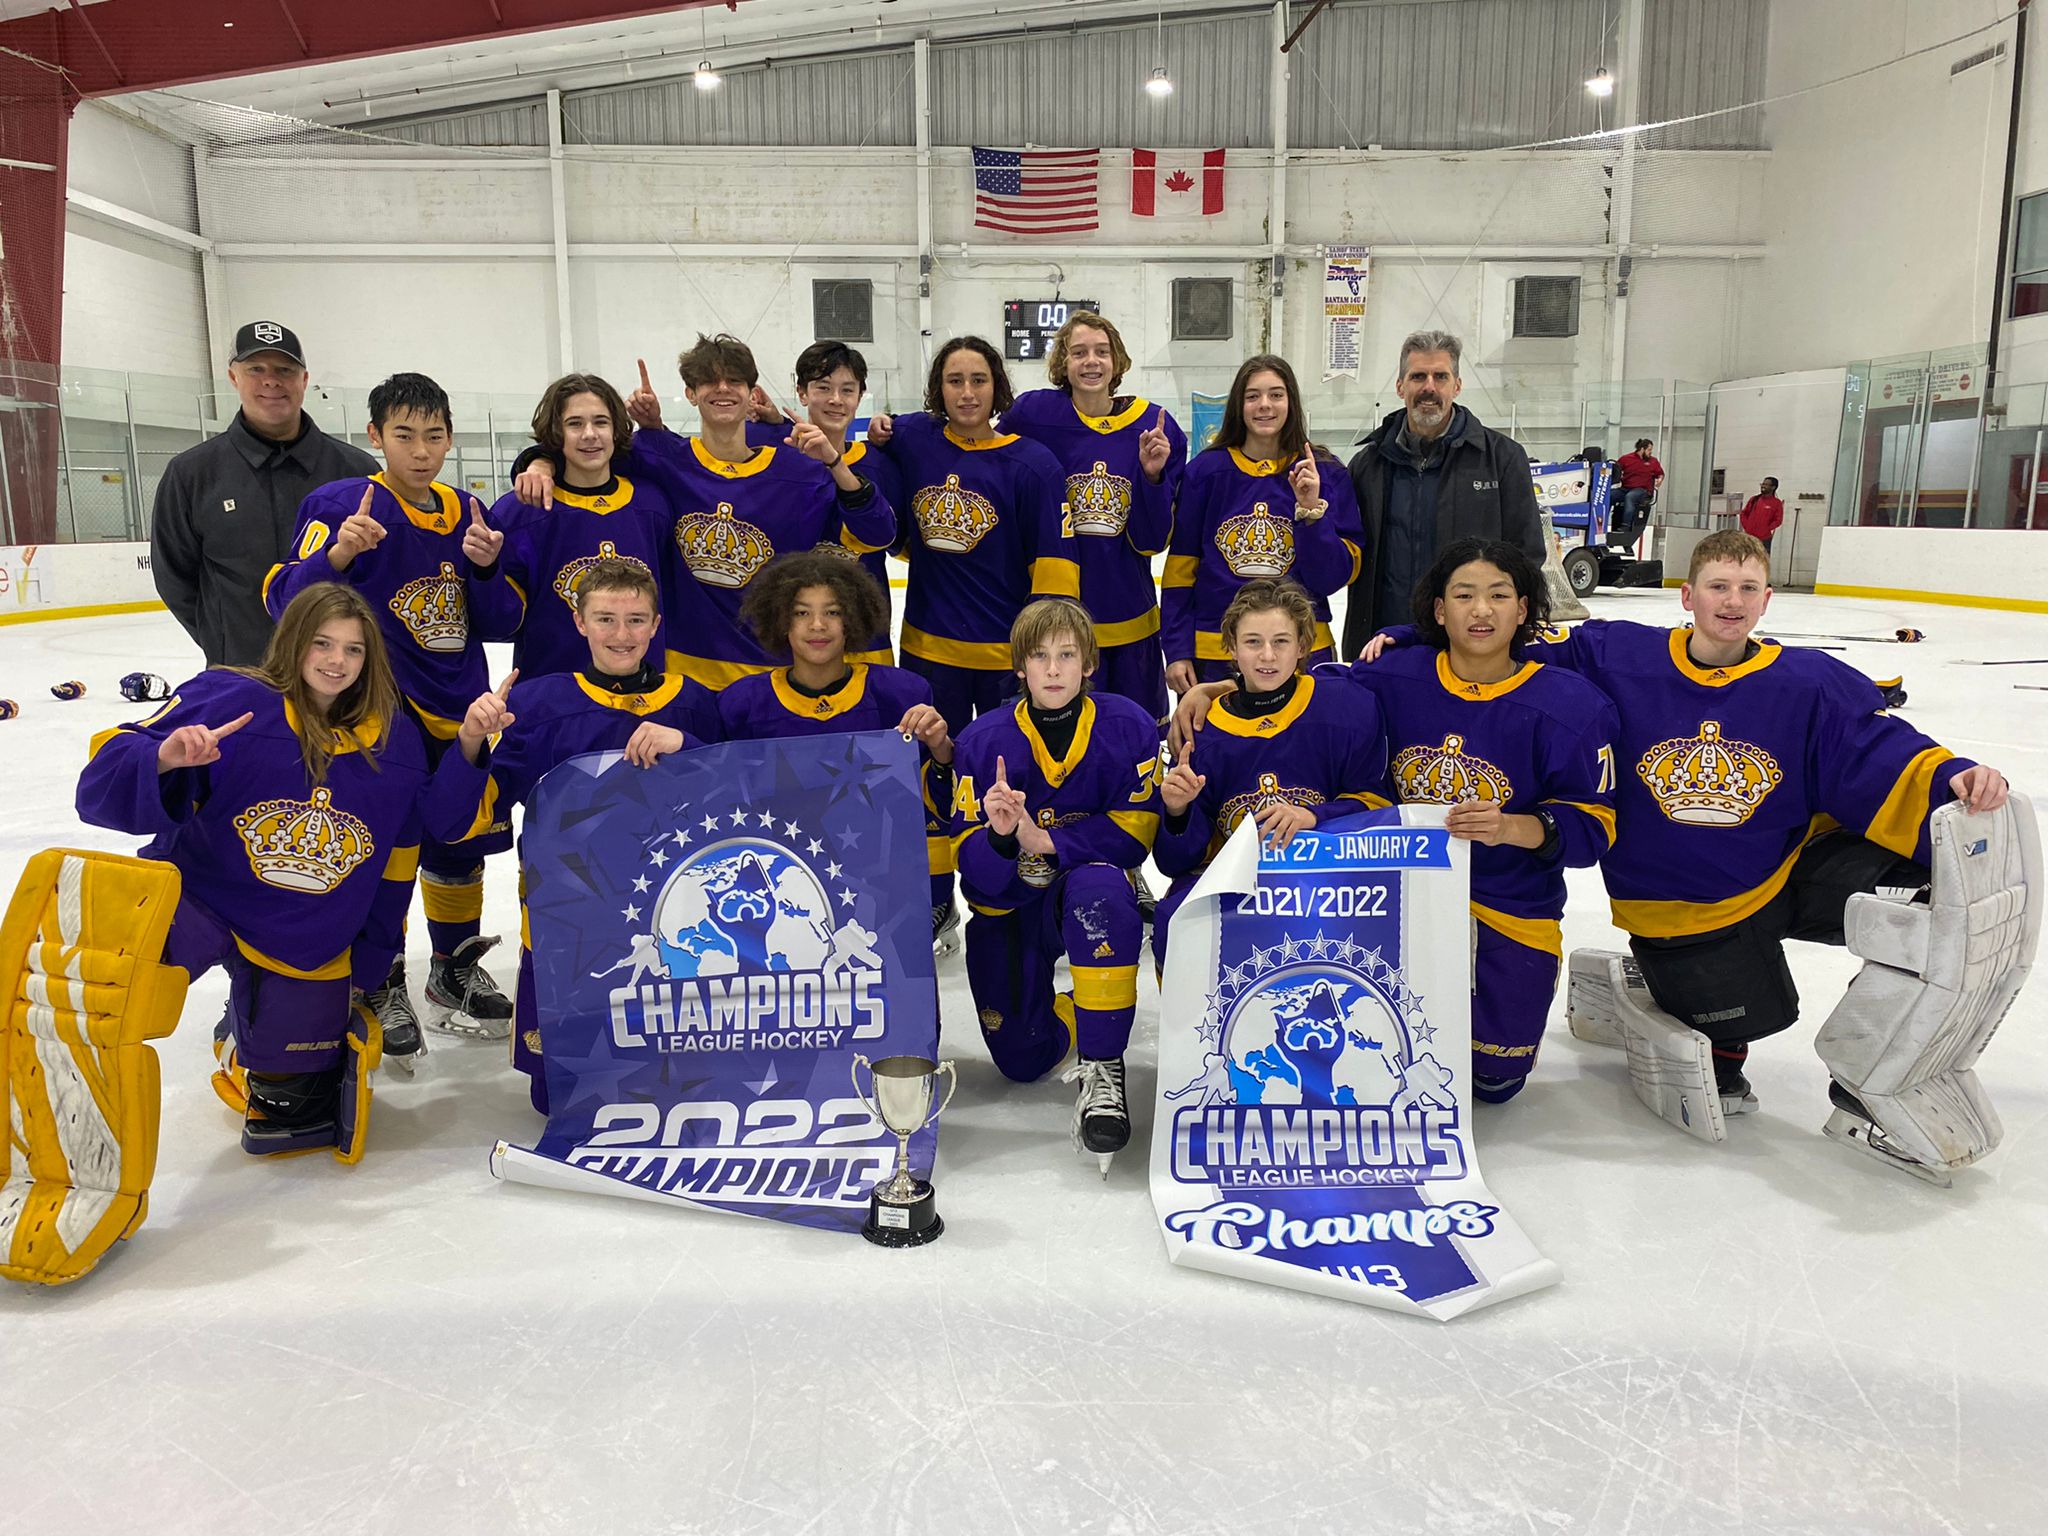 2008 Los Angeles Jr. Kings championship photo from 2022 Champions League hockey tournament